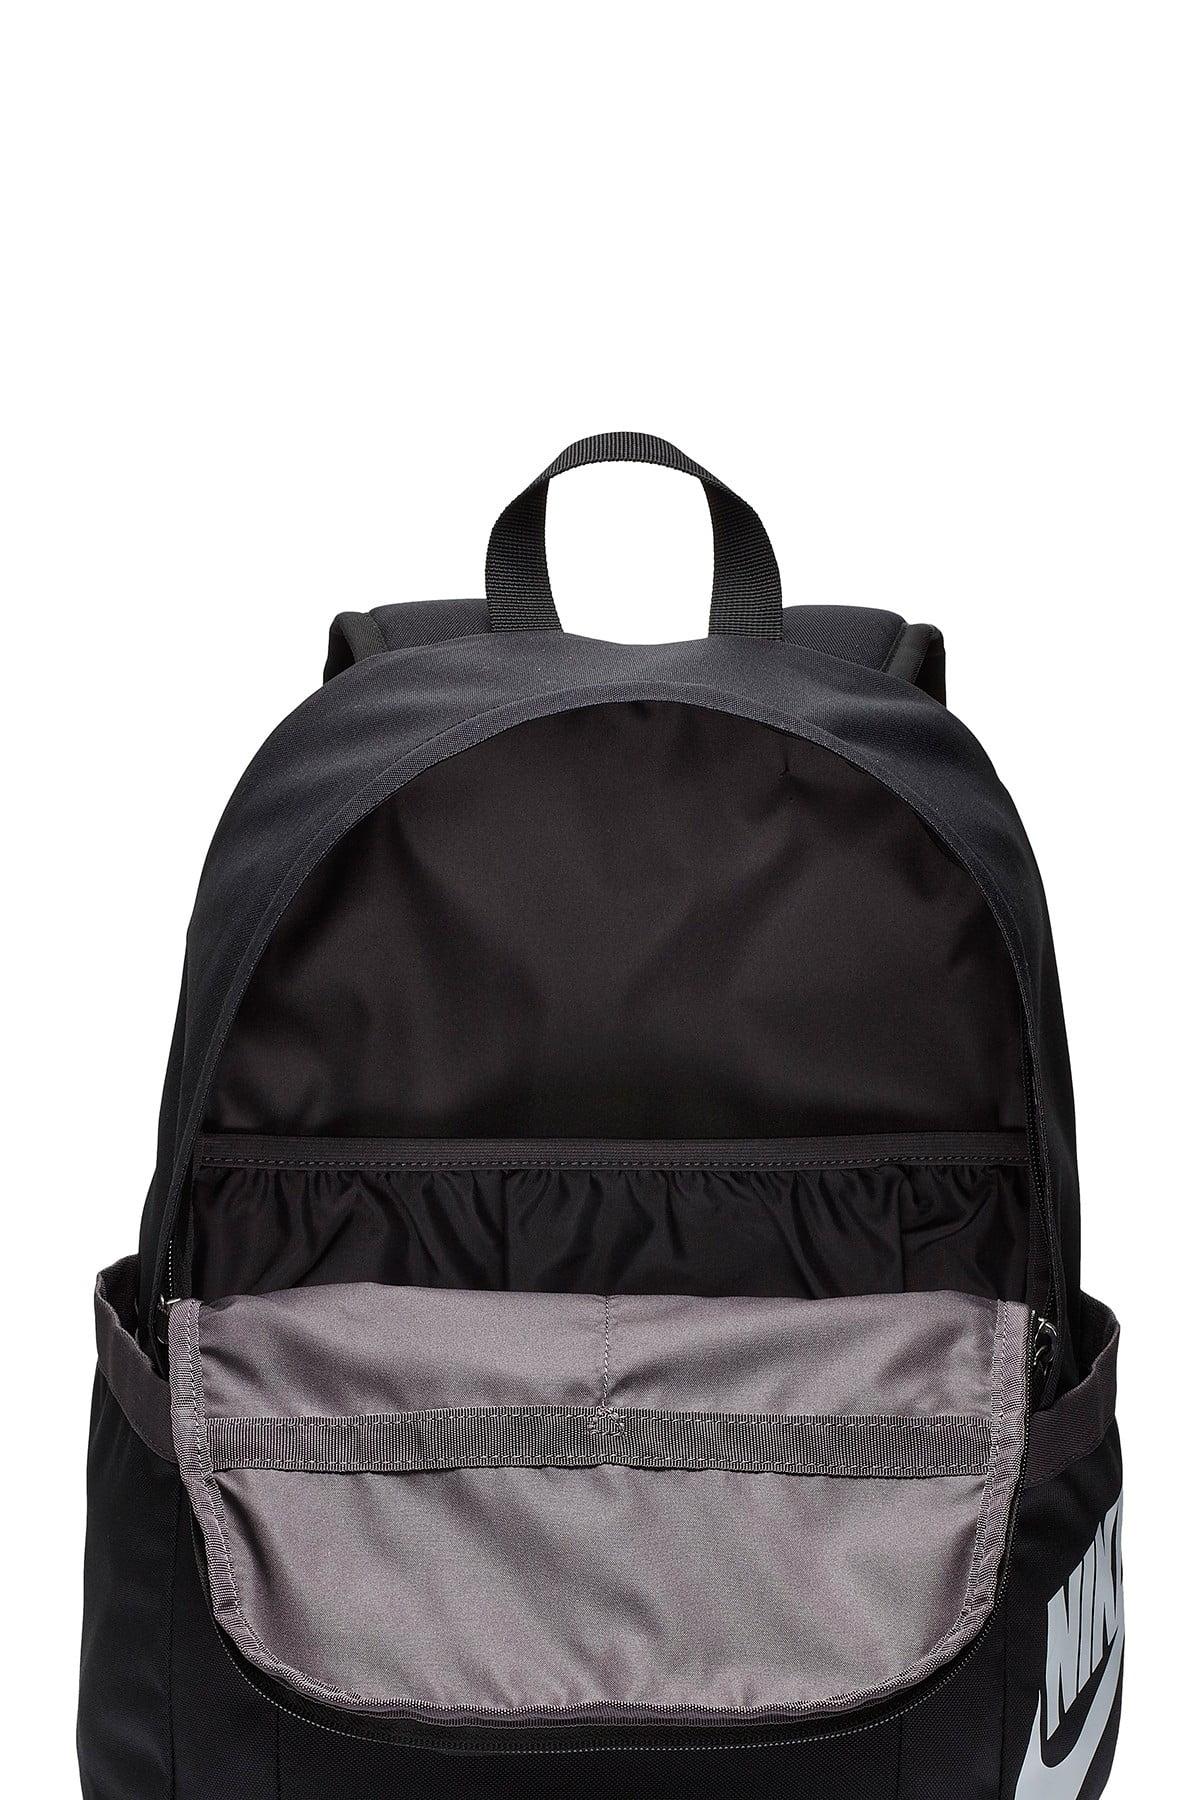 Nike Synthetic All Access Soleday Backpack in Black/White (Black) | Lyst